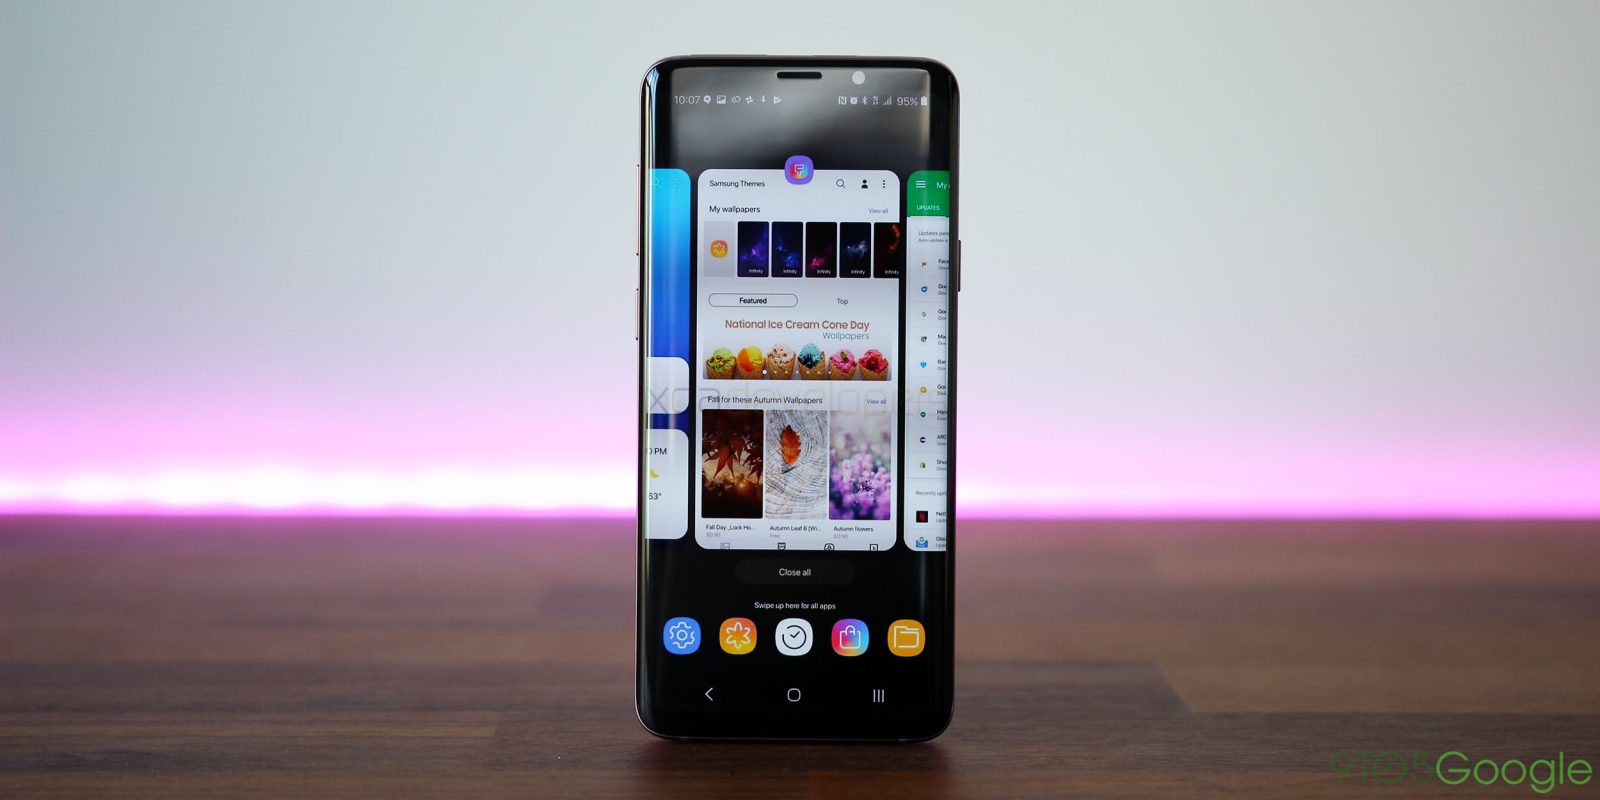 Here's an early look at Android 9 Pie on Galaxy S9+ - 9to5Google1600 x 800